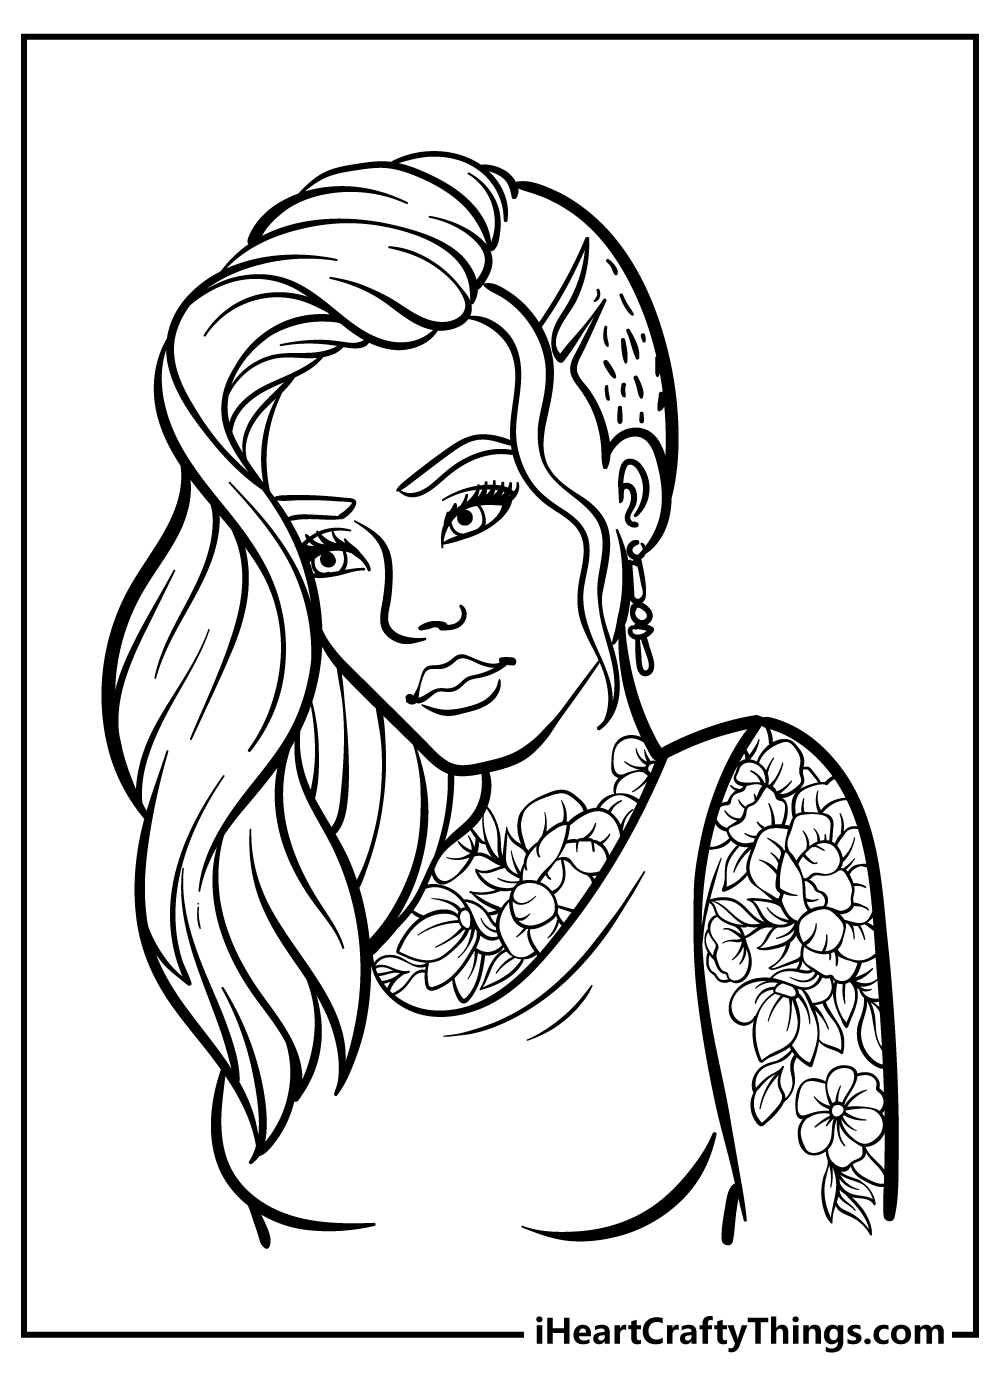 Coloring Pages For Teens free download